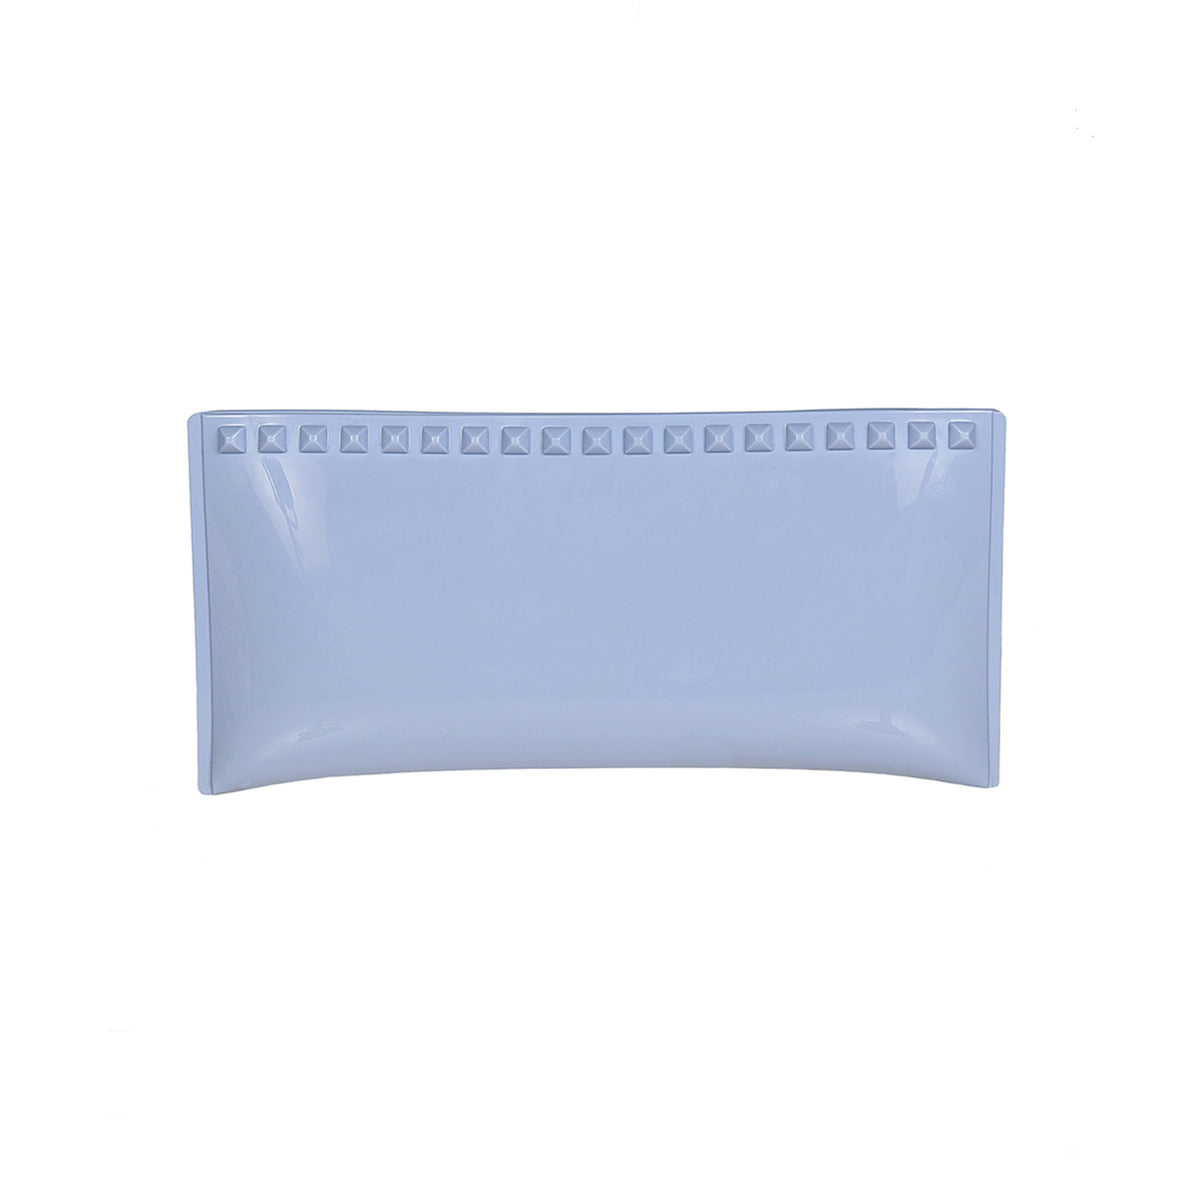 Baby blue Carmen Sol Julian jelly bags with studs